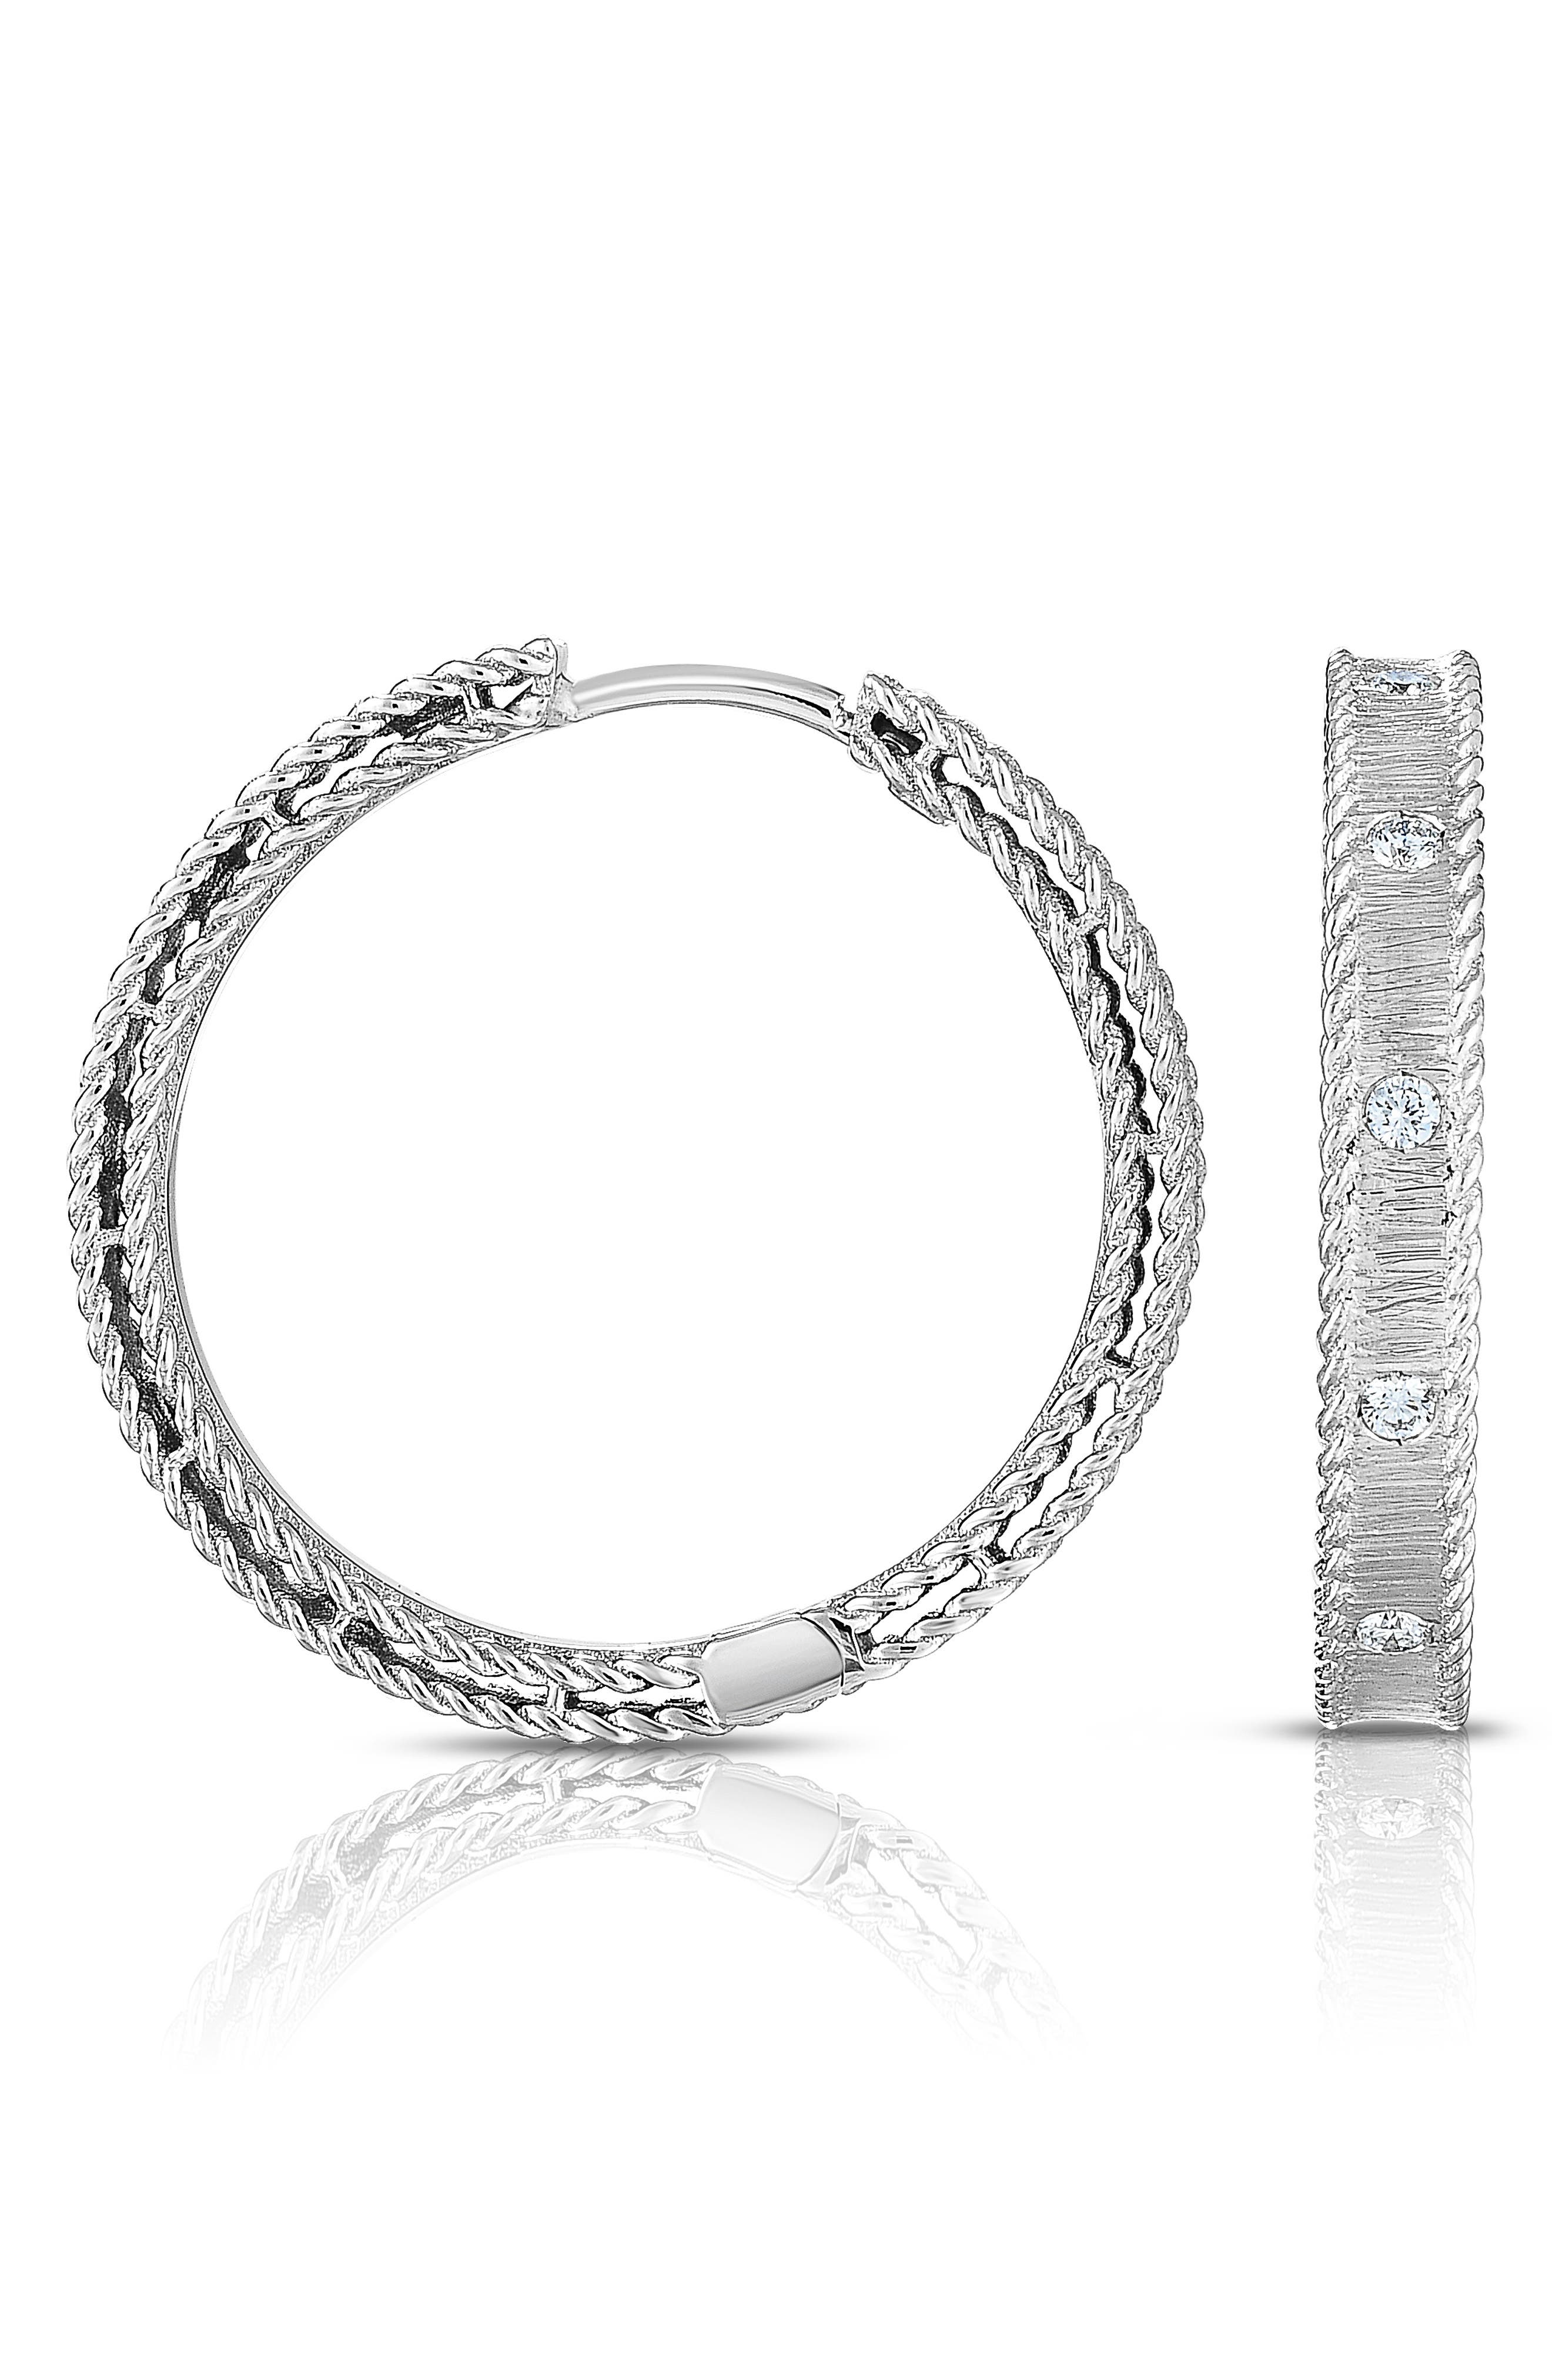 Mia Diamonds Sterling Silver White Blue Crystal and Resin Hoop Earrings Fine Jewelry for Womens Gift Set 